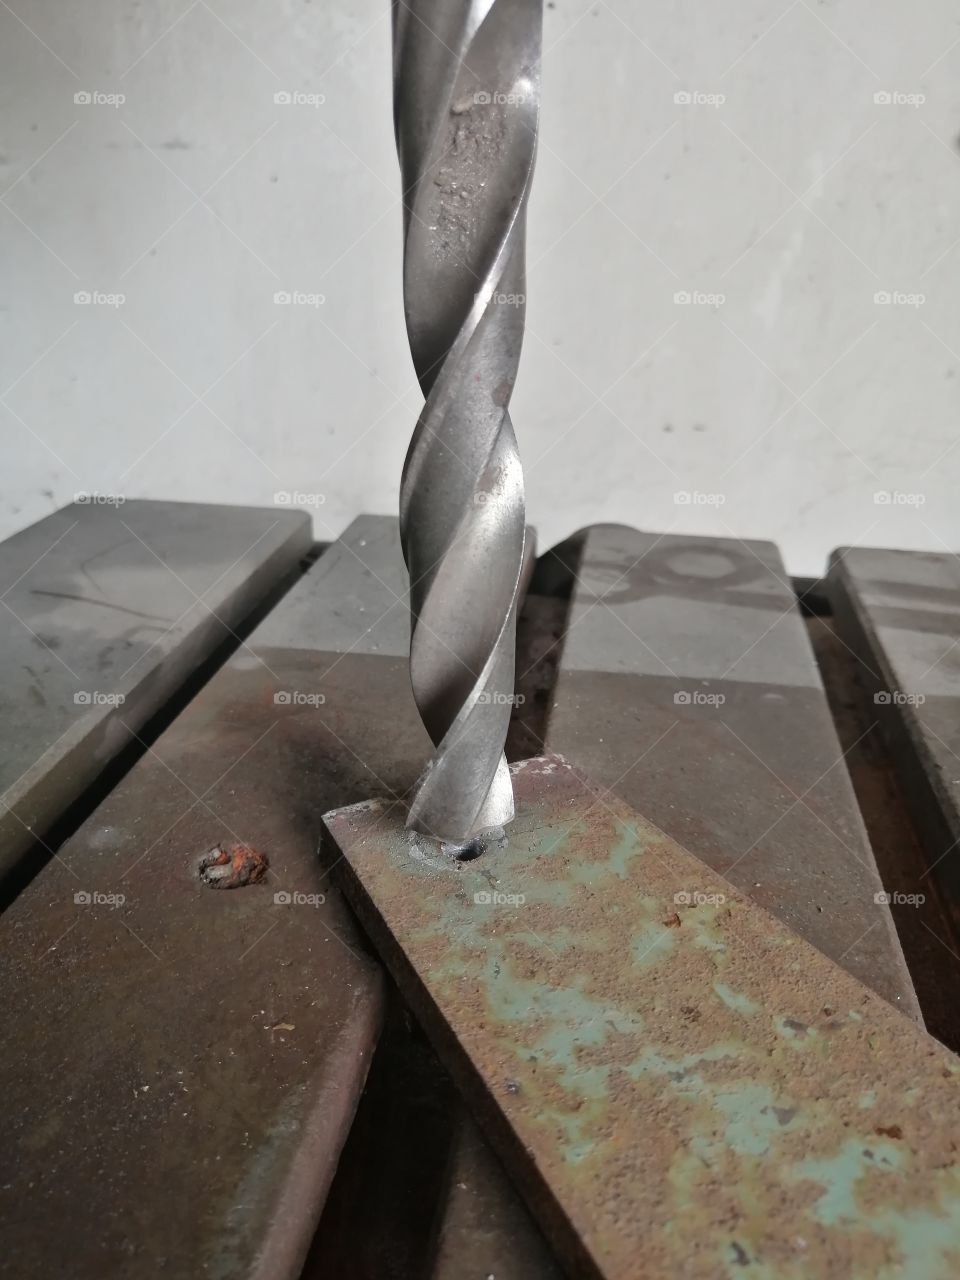 drill in work with metal plate close-up